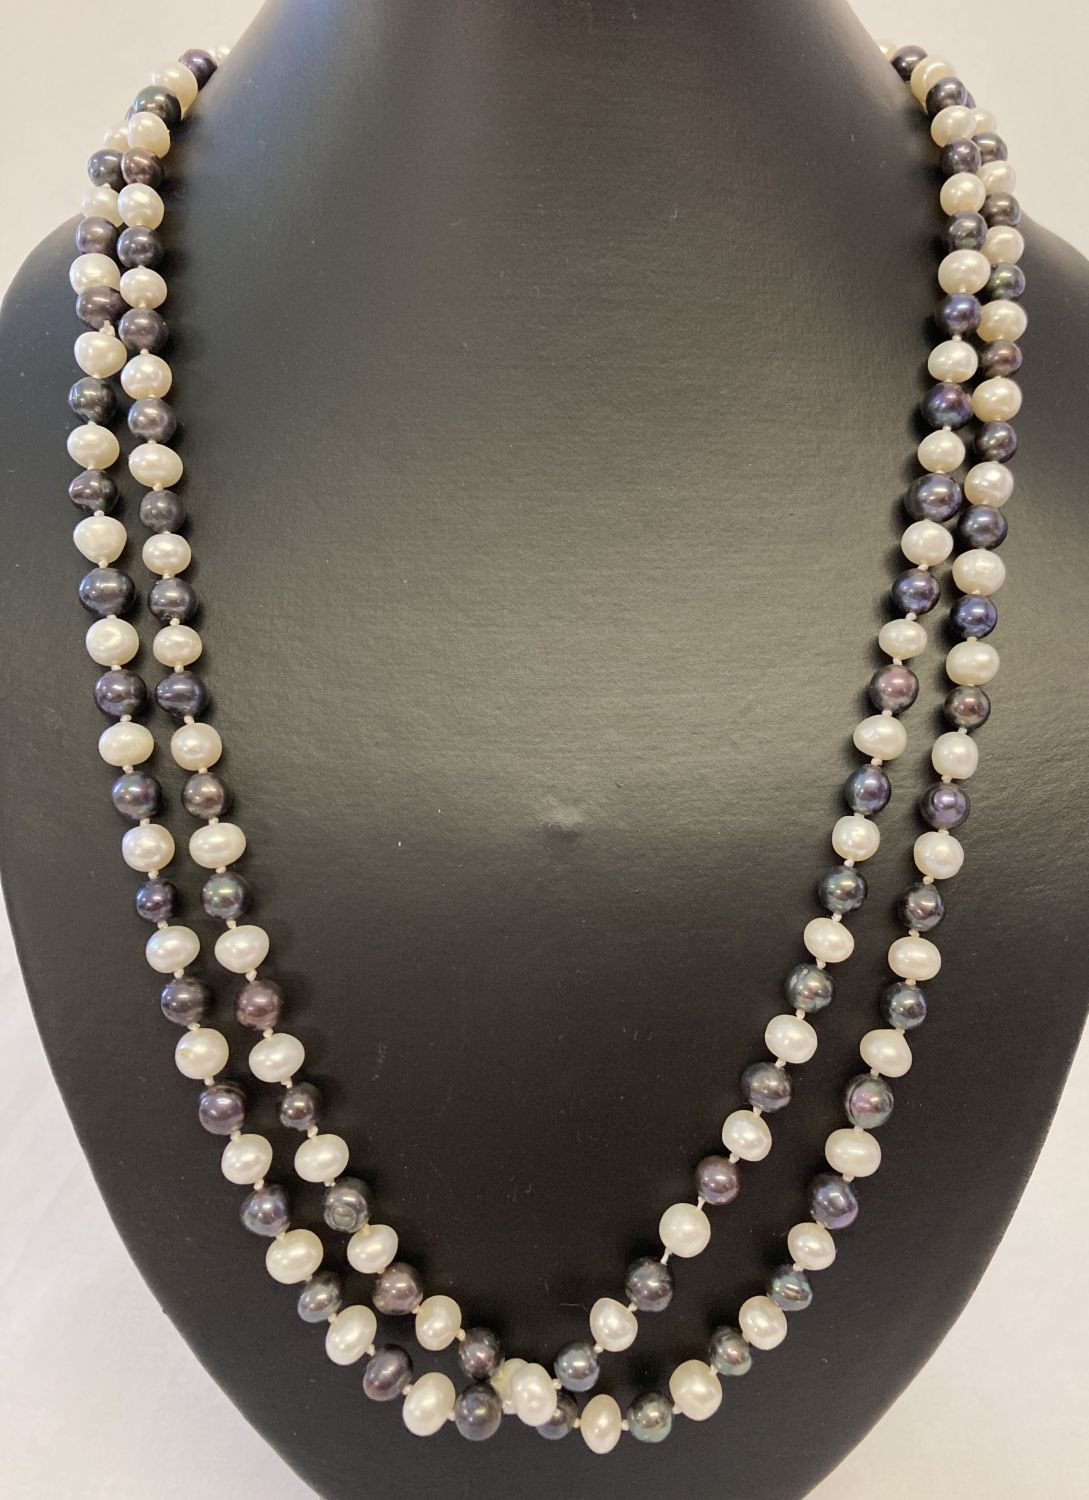 A 48" string of alternate cream and peacock freshwater pearls.